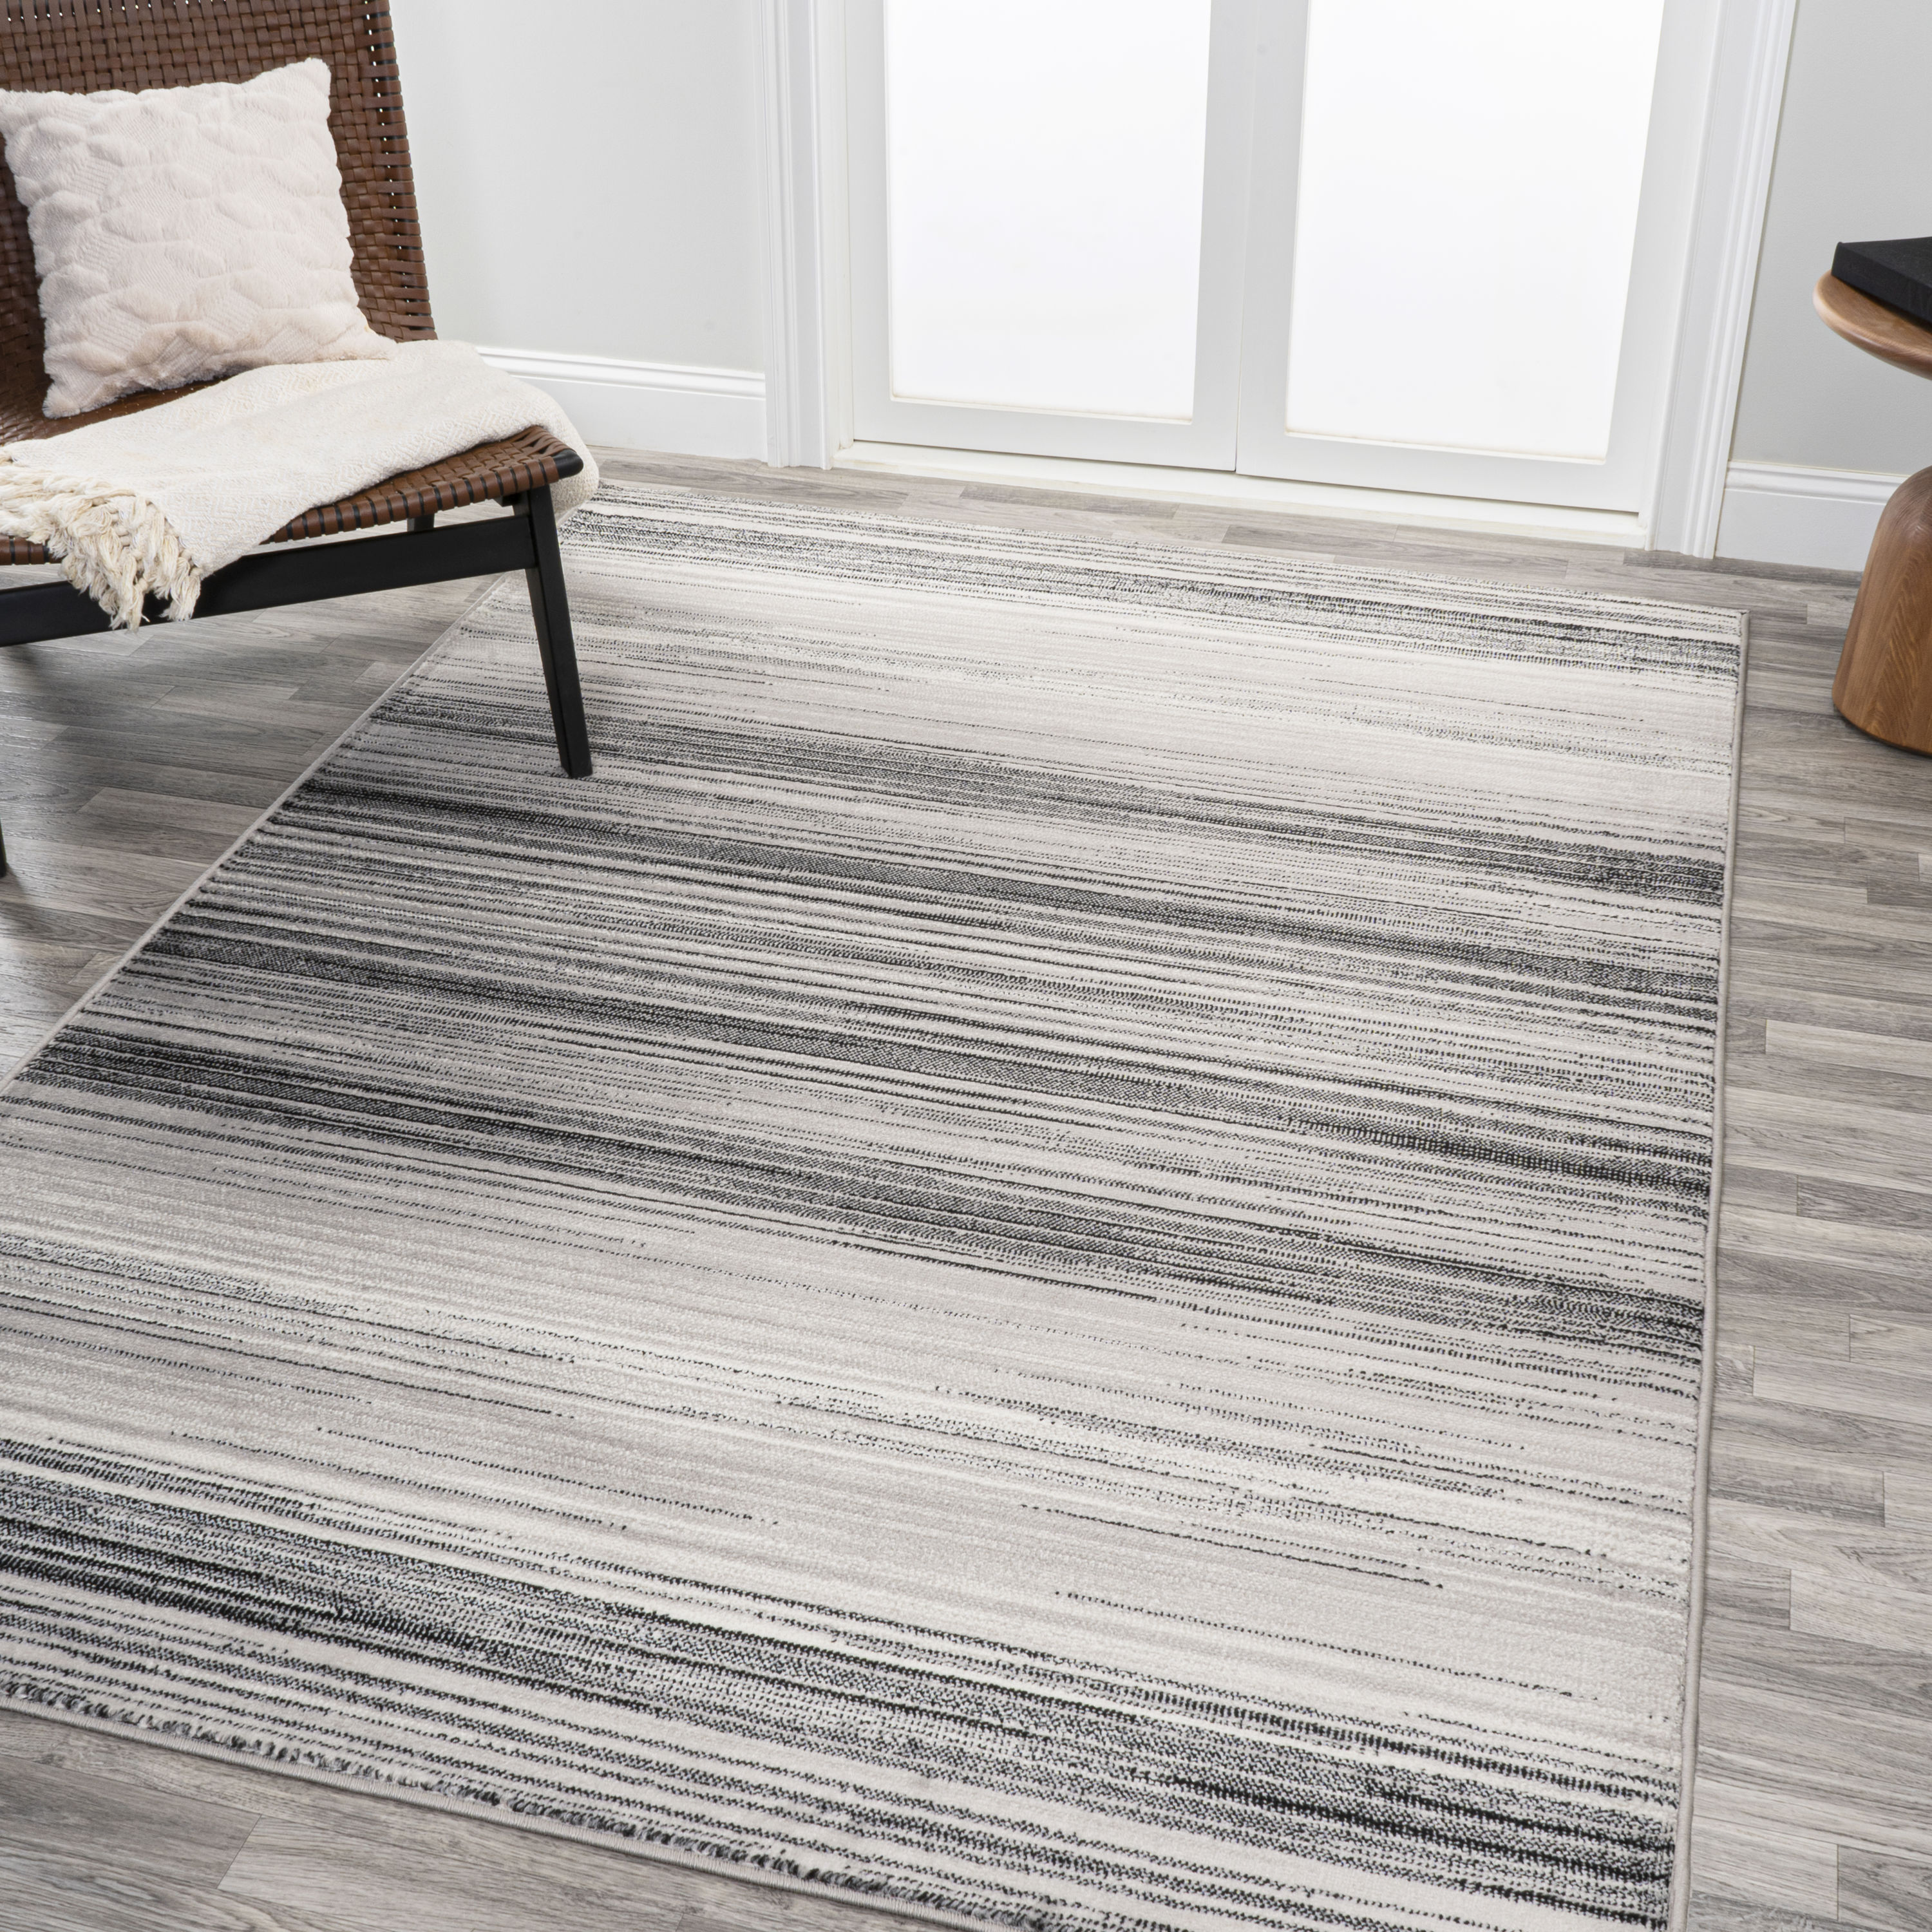 Flair Rugs Light And Dark Ombre Runner 60 x 230 Cm 